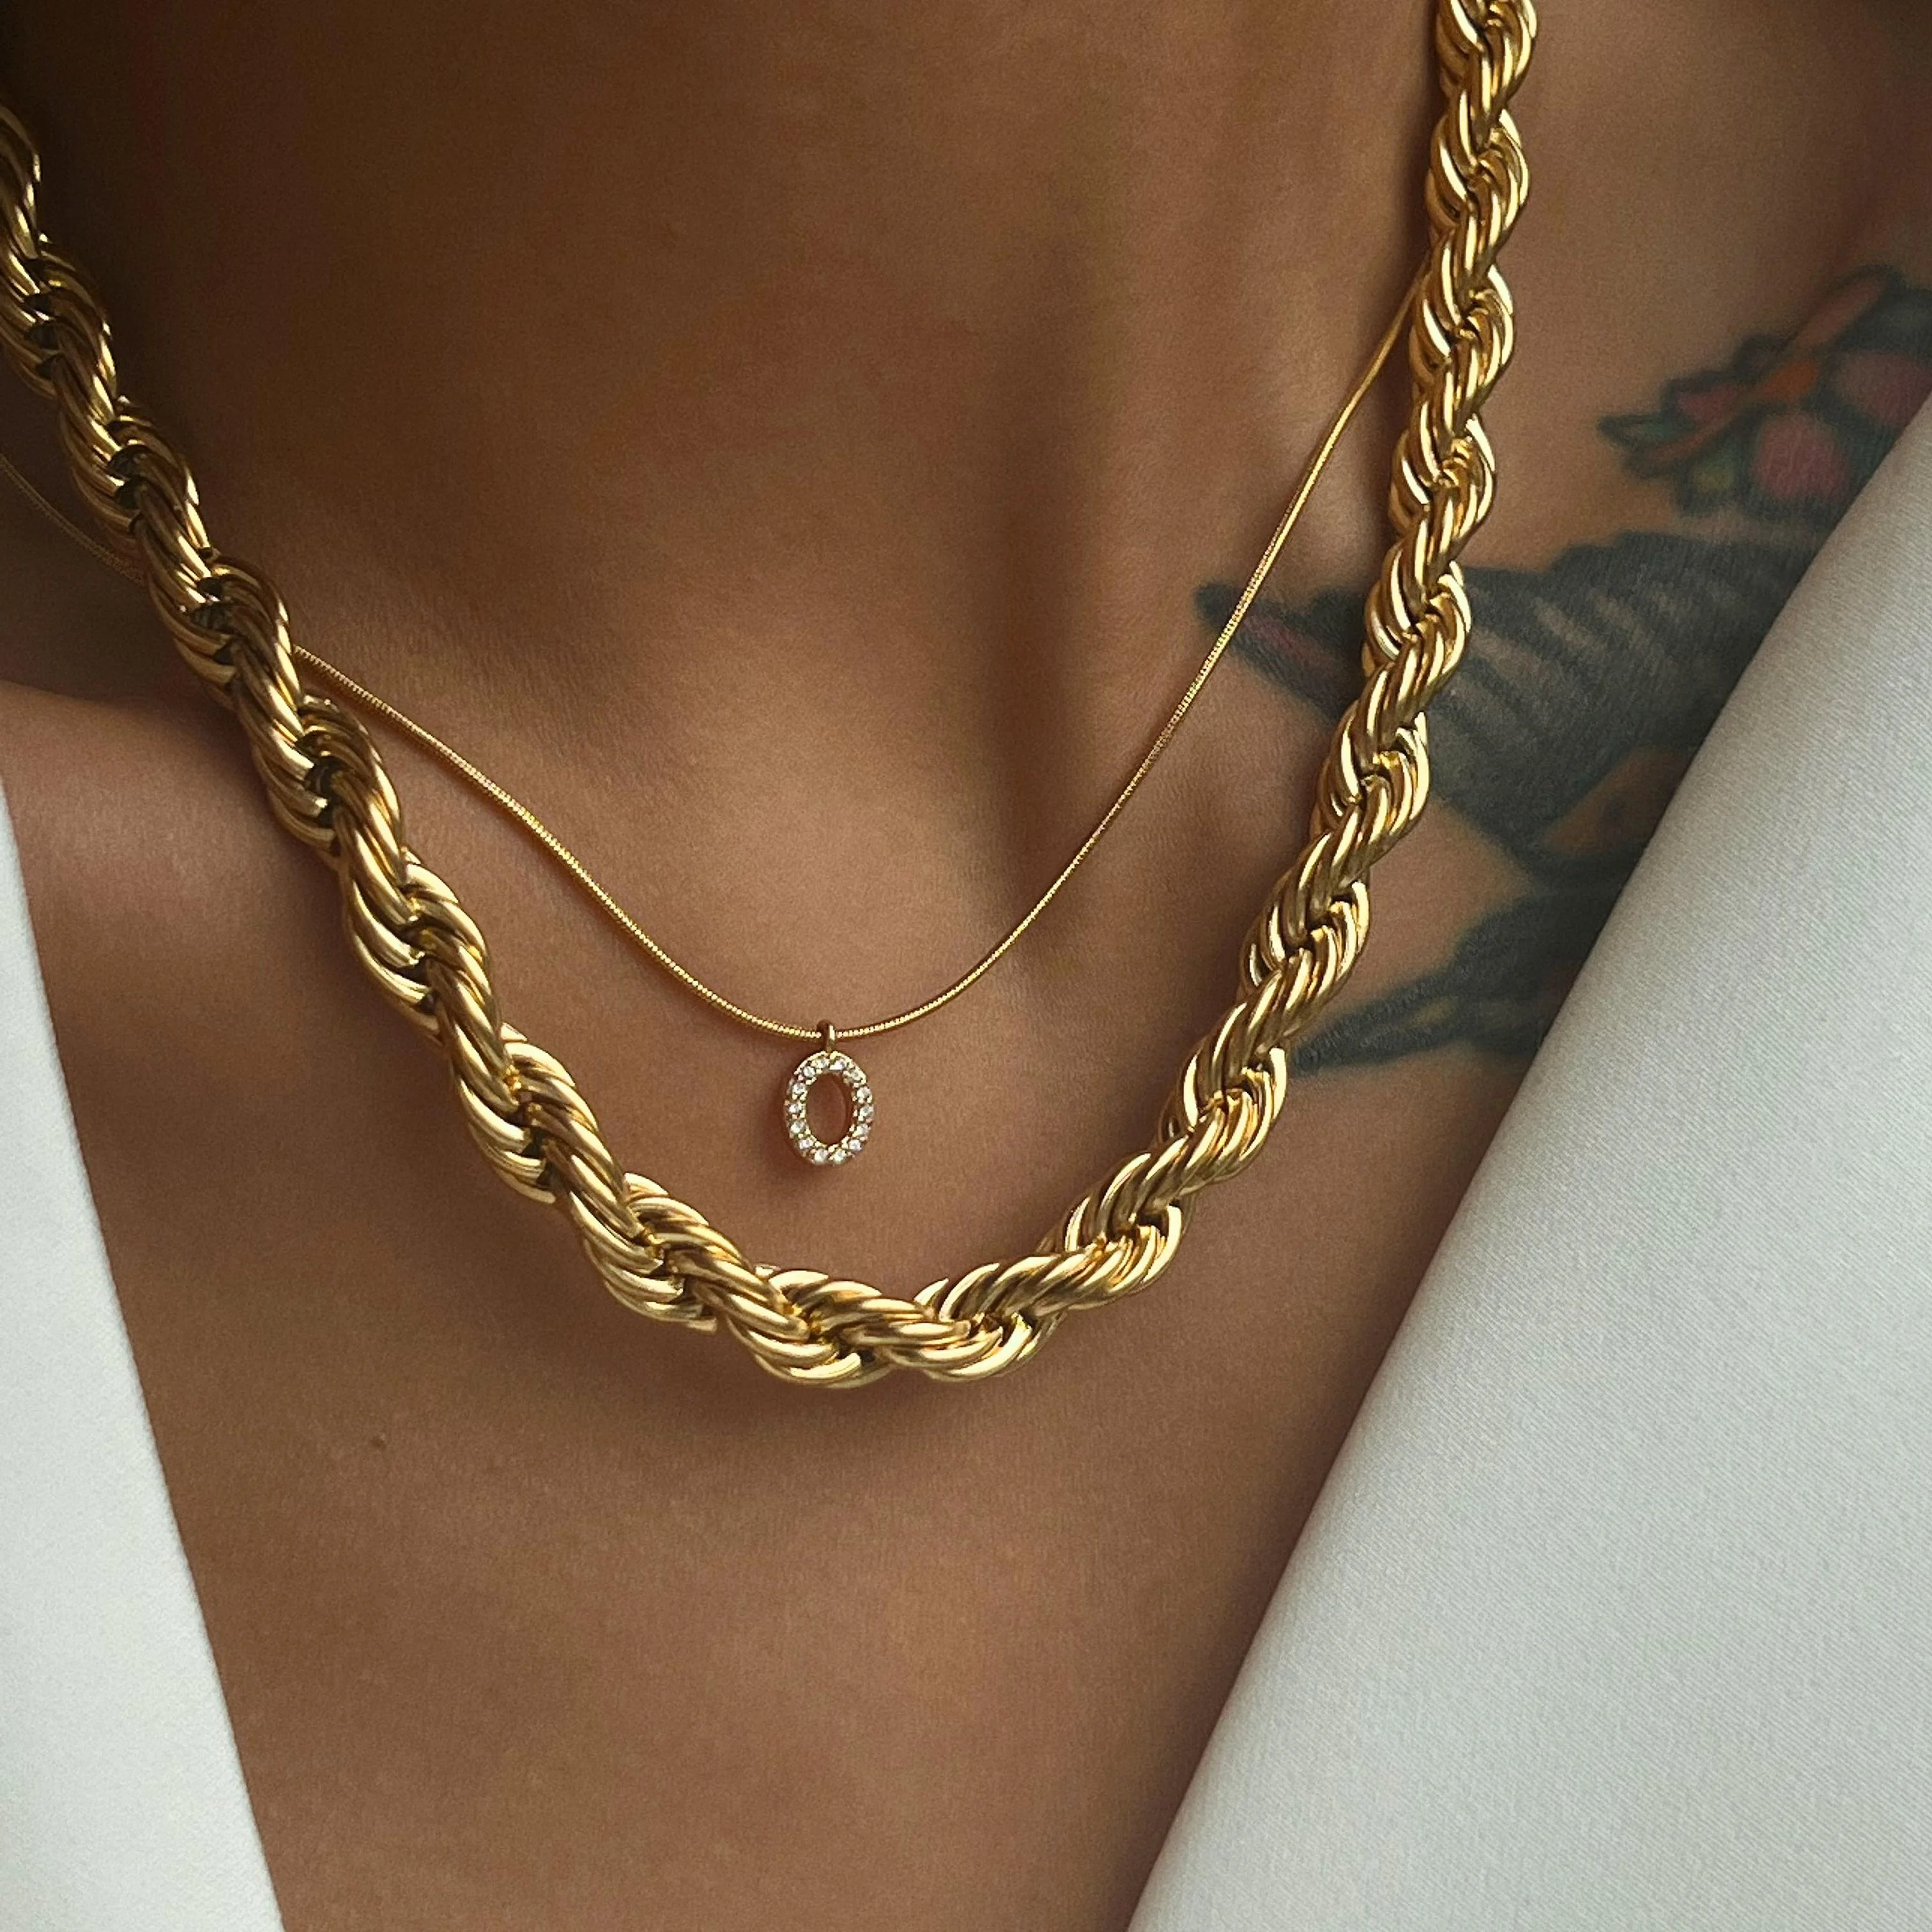 

2022 Dazan New Ins 18k Gold Plated Tarnish Free Stainless Steel 8MM Singapore Twist Chain Necklace Waterproof Jewelry For Women